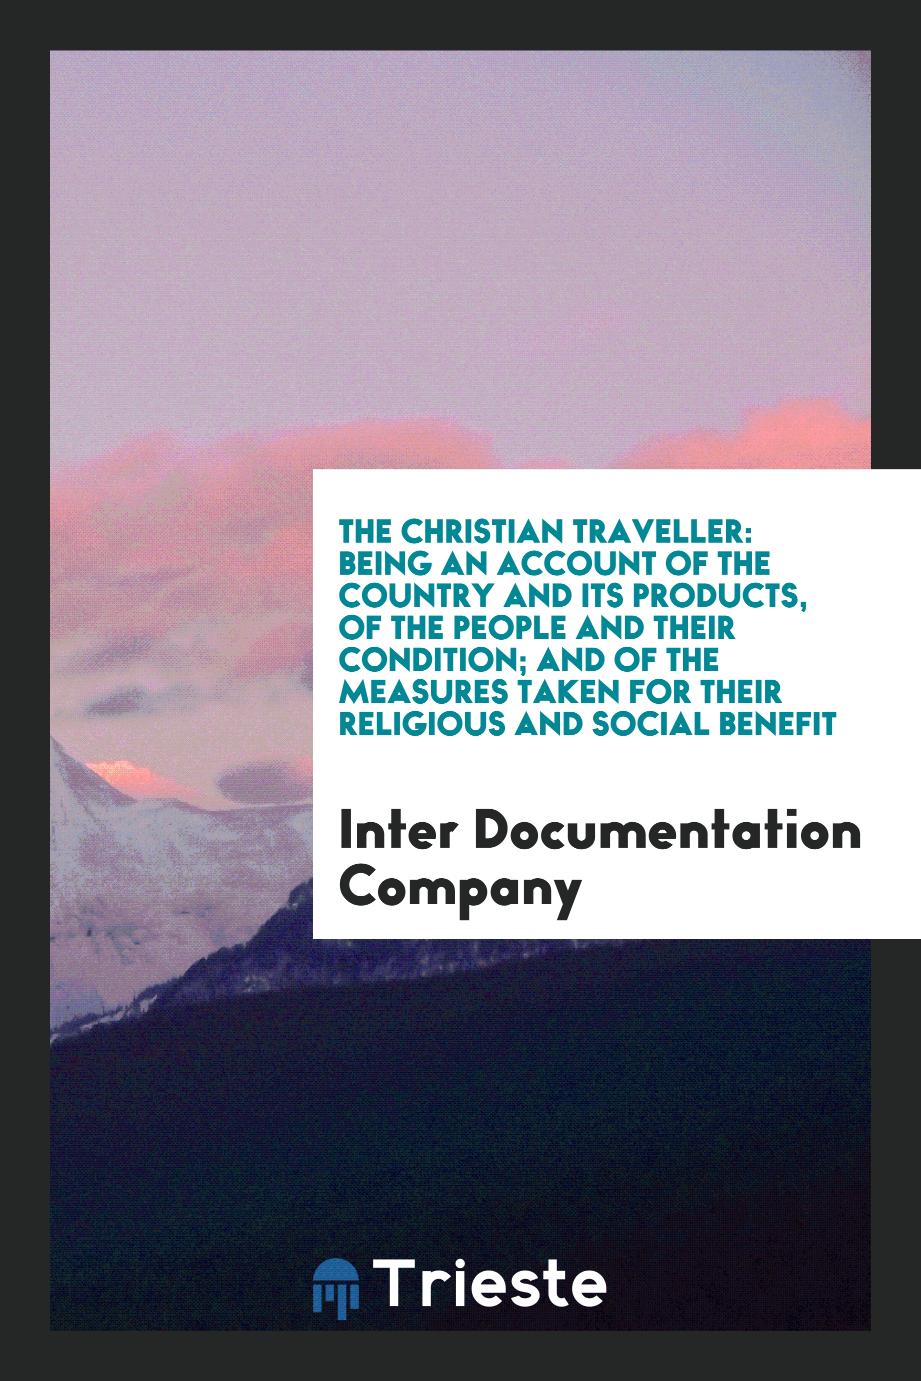 The Christian Traveller: Being an Account of the Country and Its Products, of the People and Their Condition; and of the Measures Taken for Their Religious and Social Benefit